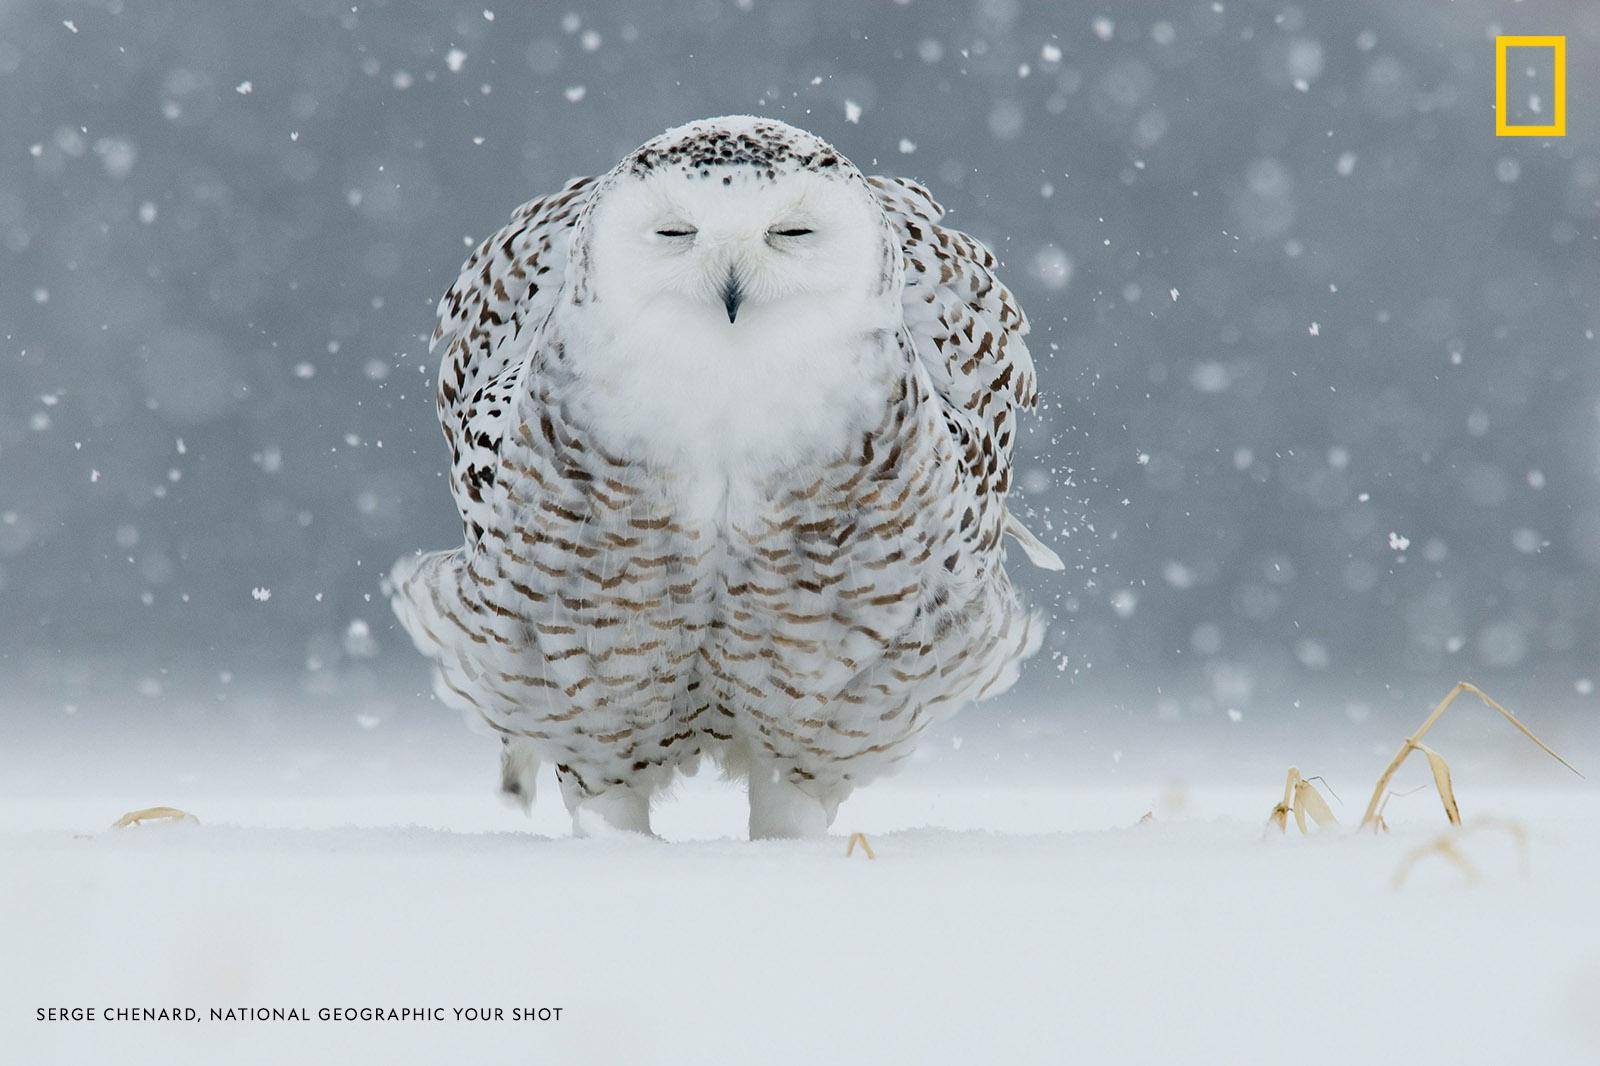 "I crawled very slowly on the ground, only a short distance," writes Your Shot photographer Serge Chenard. "Suddenly, the snow begins, and once I was able to stabilize my camera on the ground, I documented this beautiful scene." https://on.natgeo.com/2JX5ny2